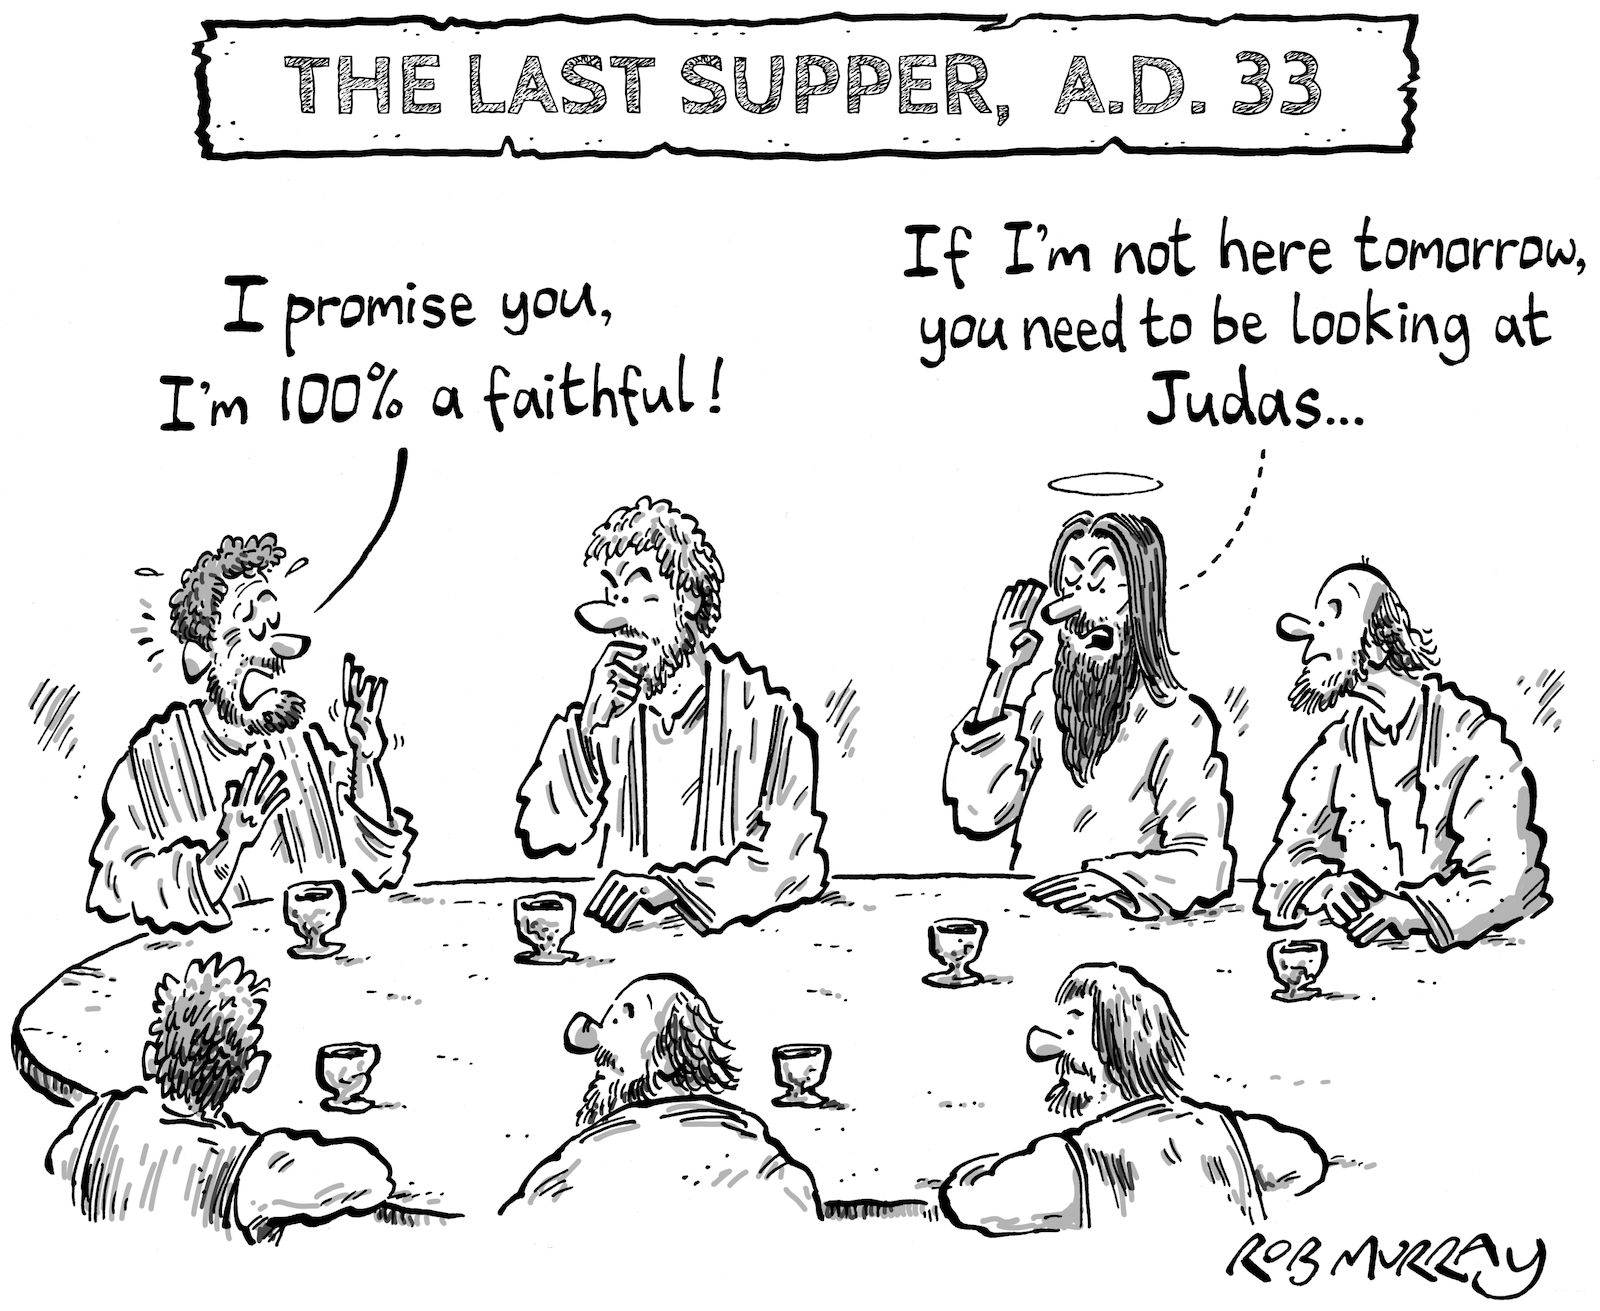 Alternate Histories: The Last Supper, A.D. 33